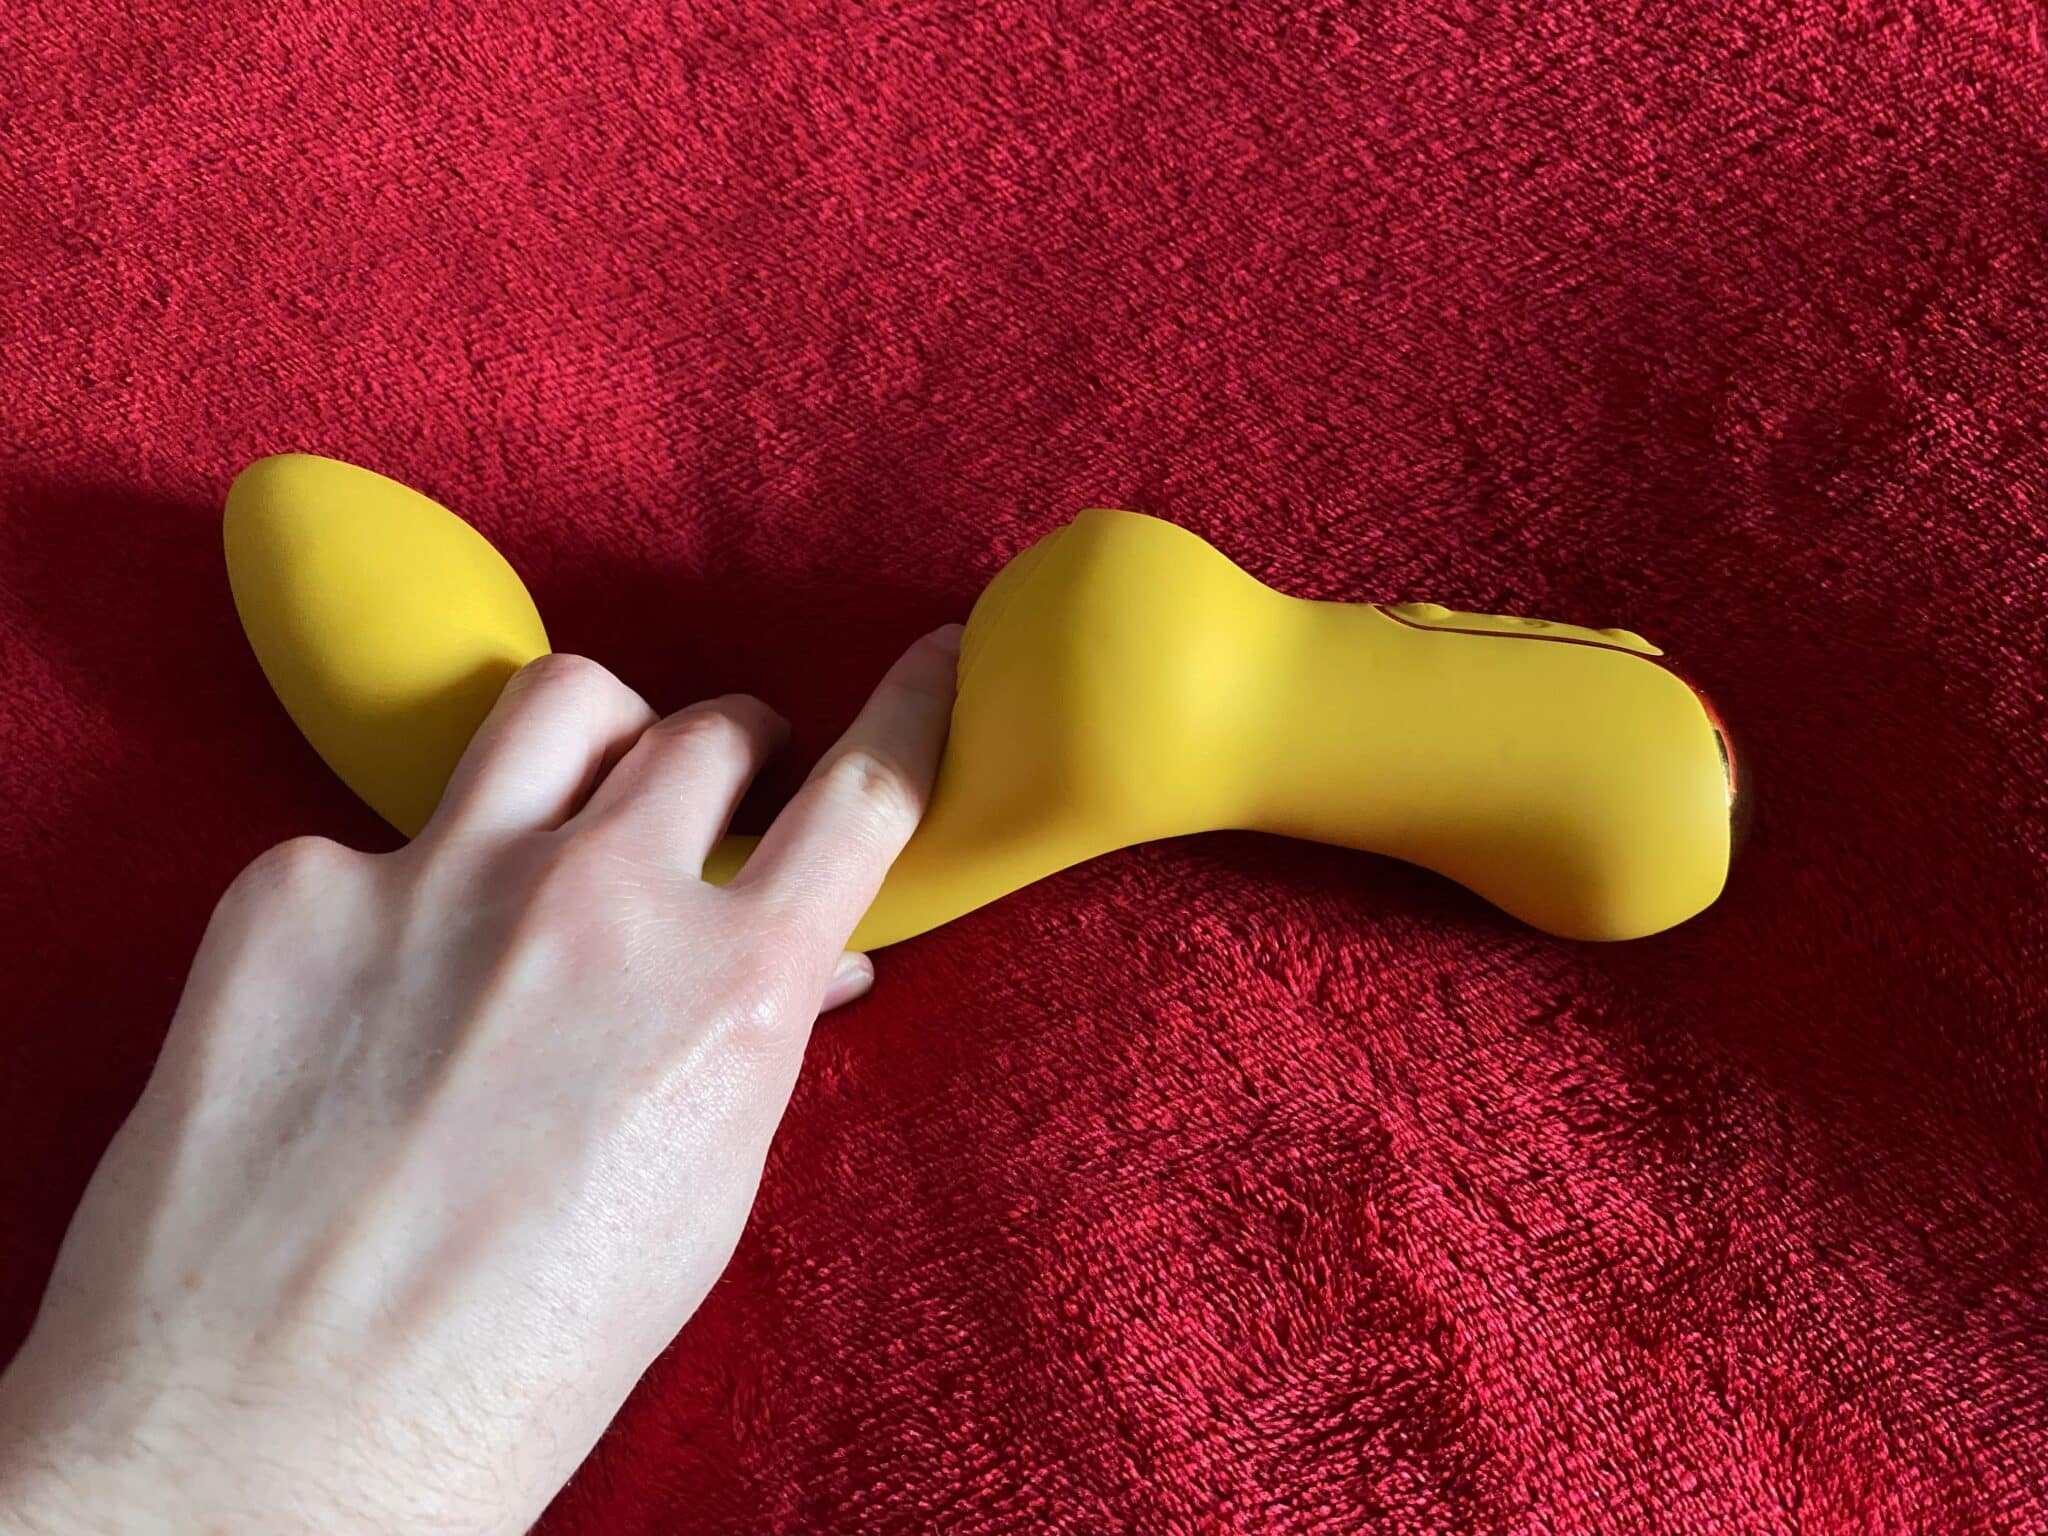 Your New Favorite Double Vibrator Reviewing the design